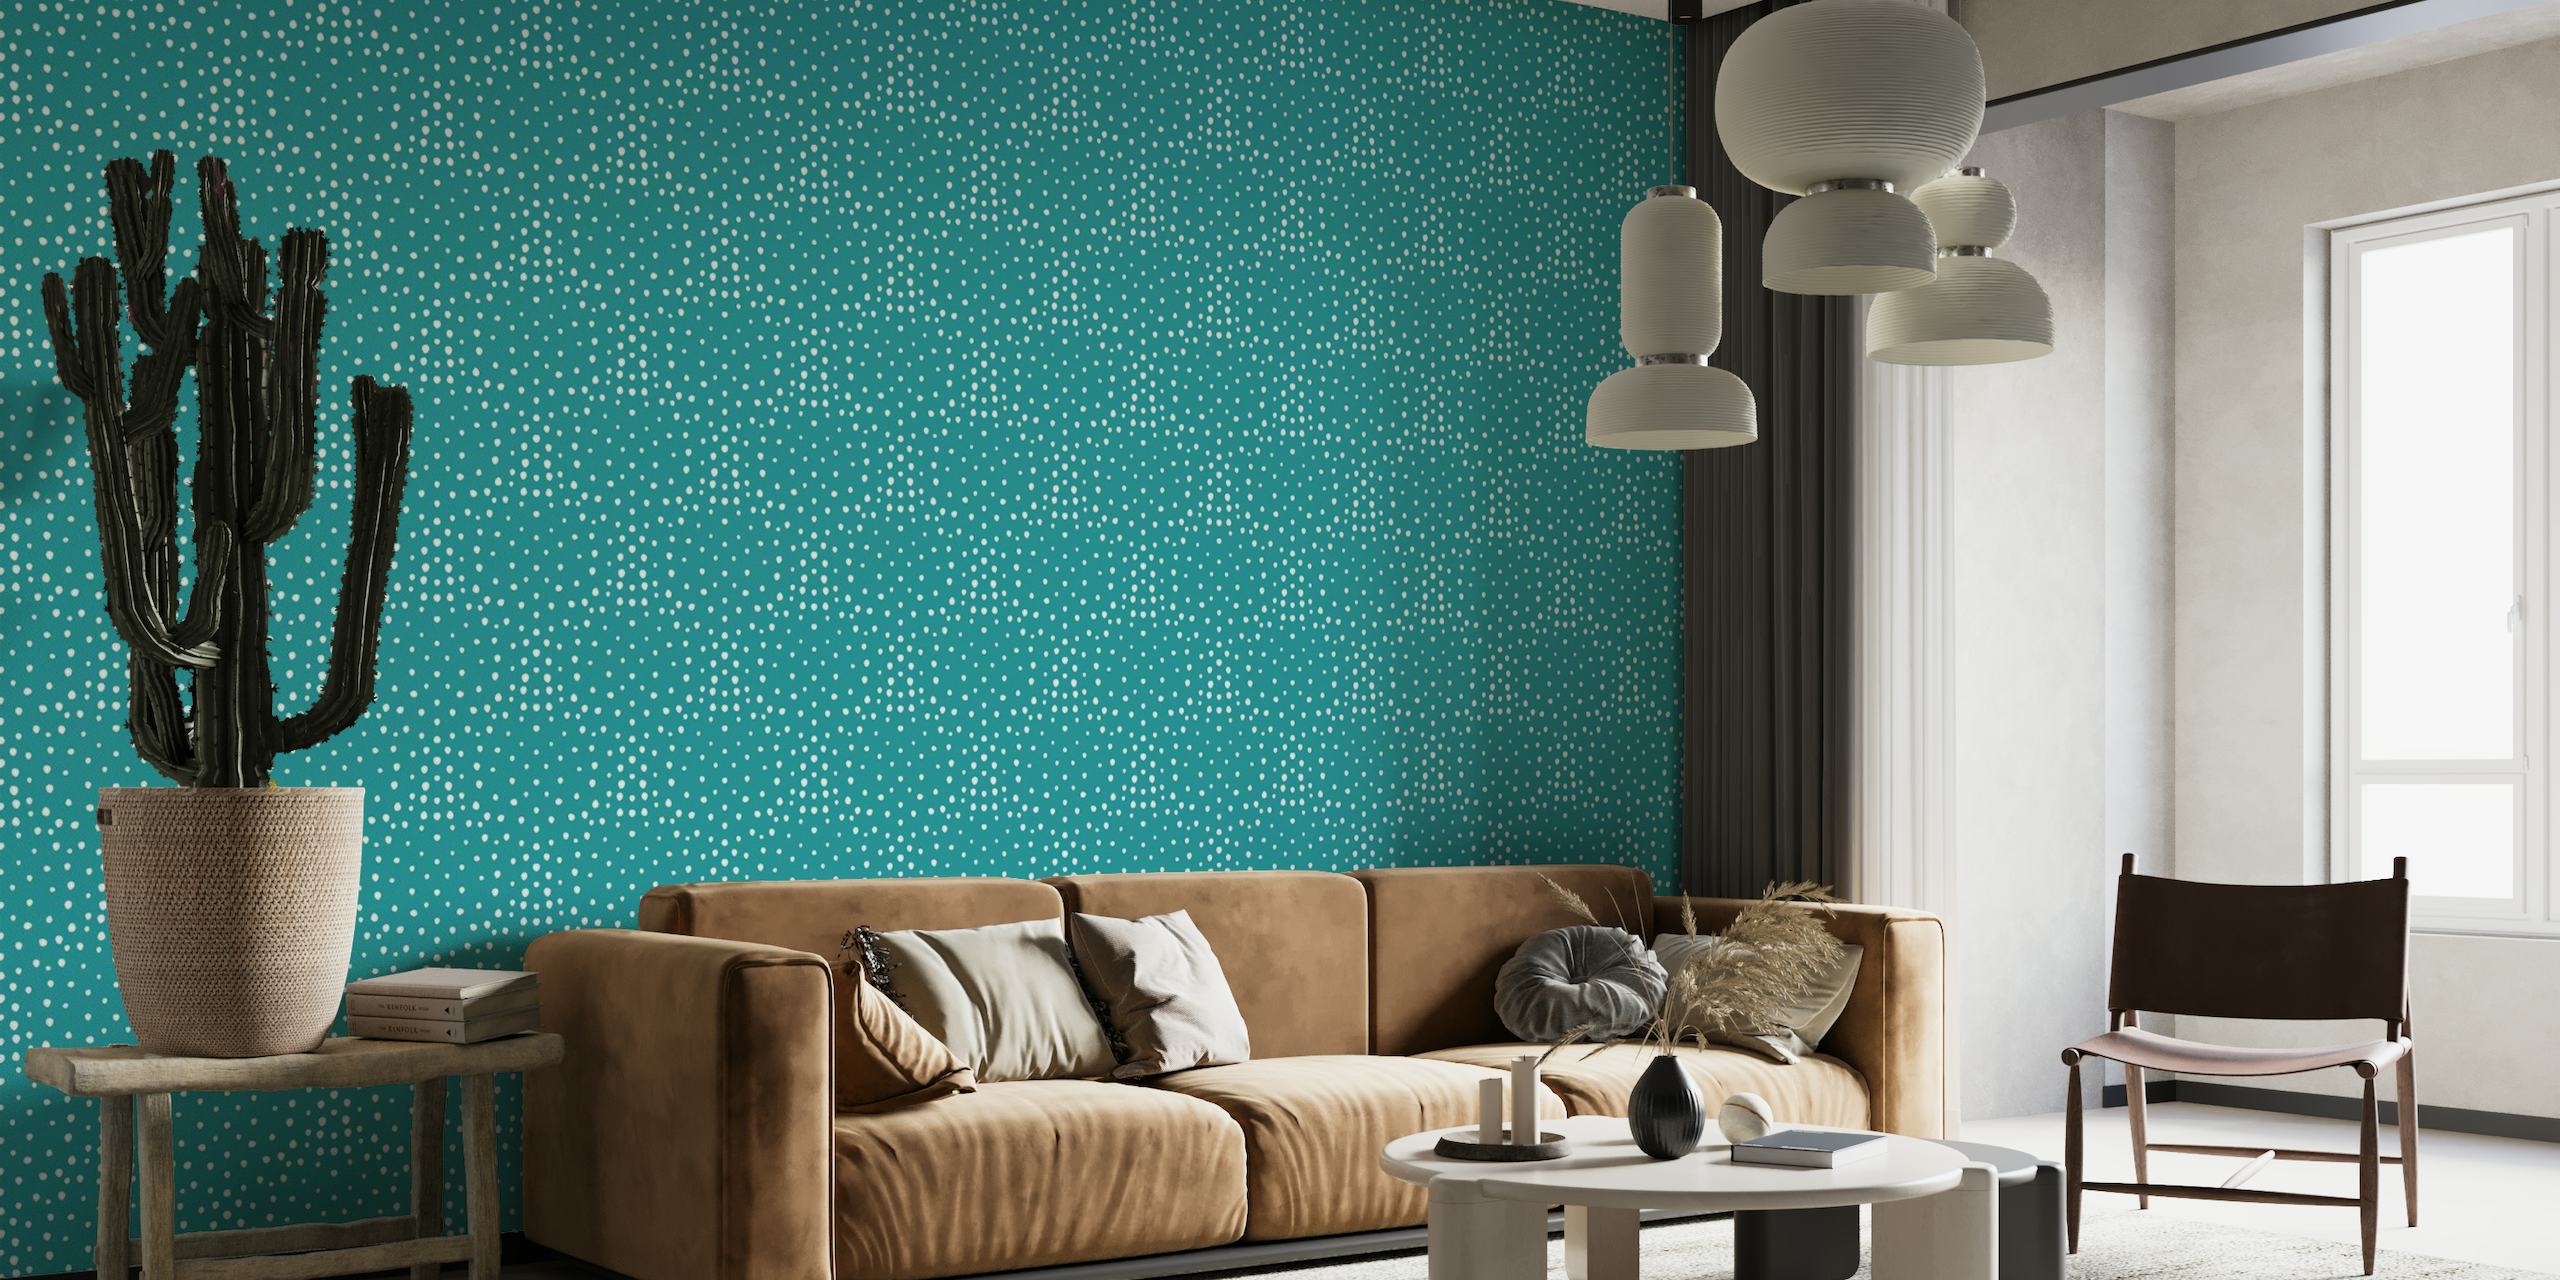 Turquoise Tranquility: Abstract Dots Blender Design - GD23-A17 tapeta